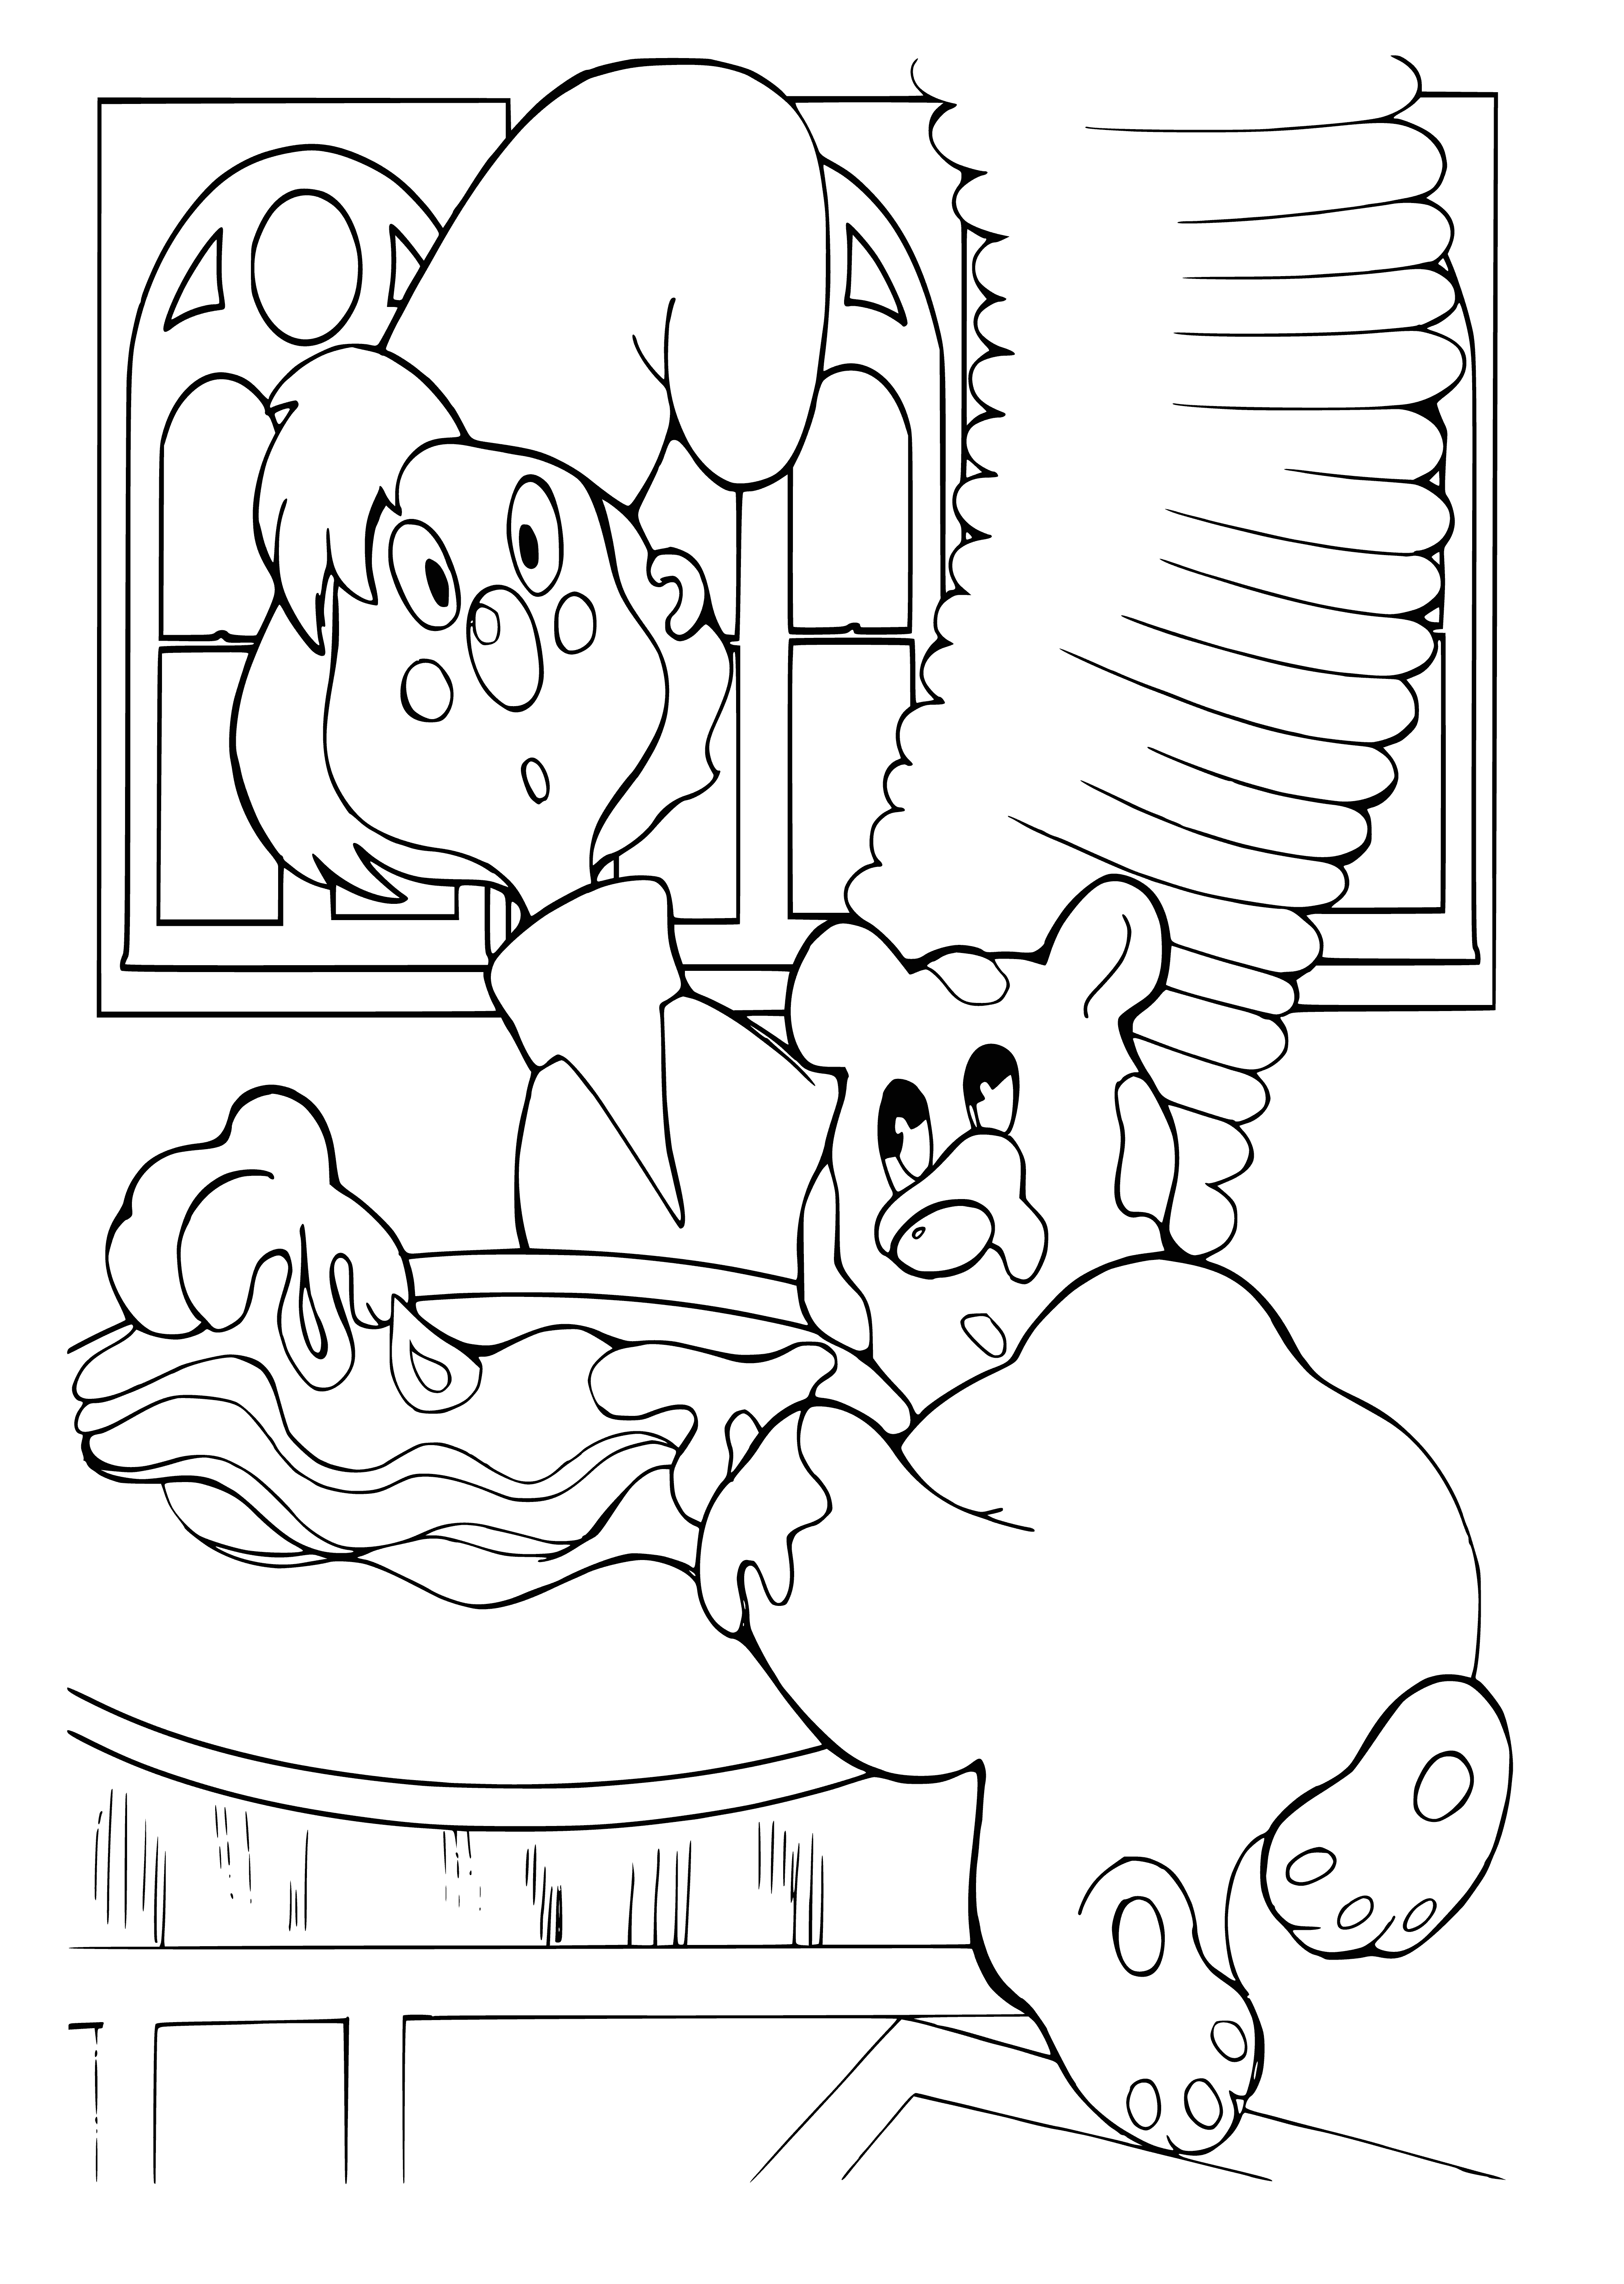 coloring page: Dark-haired woman in white apron and blue dress stirring pot on stove with wooden spoon. #kitchenlife